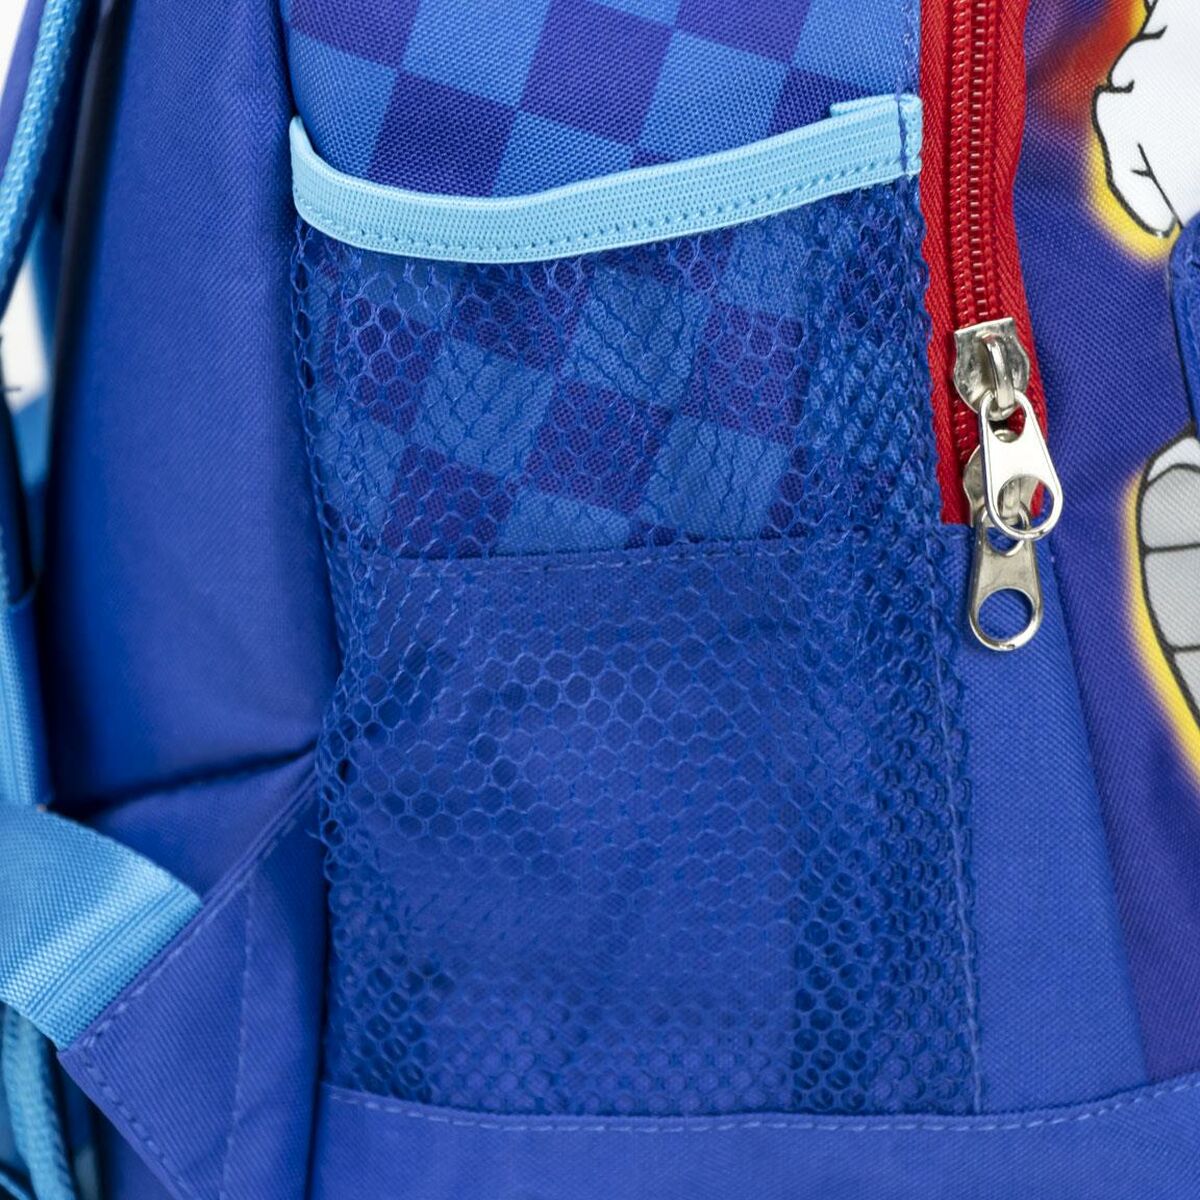 Hiking Backpack Sonic Children's 25 x 27 x 16 cm Blue - Outland Gear